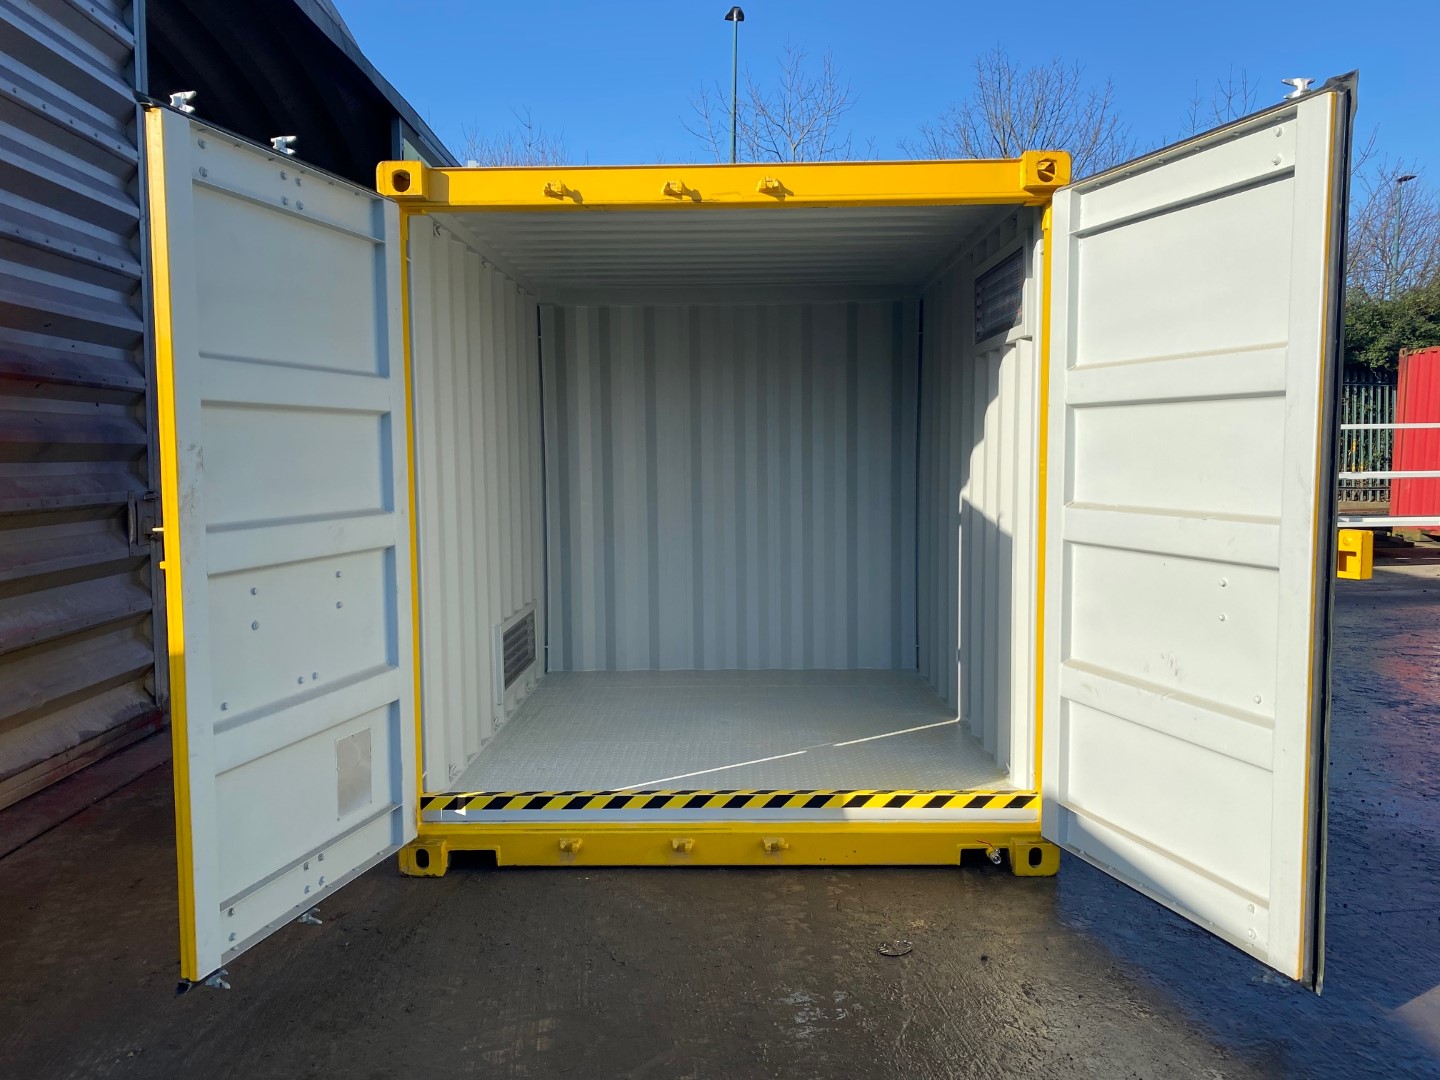 UK Suppliers of High-Security Chemical Storage Cabinets